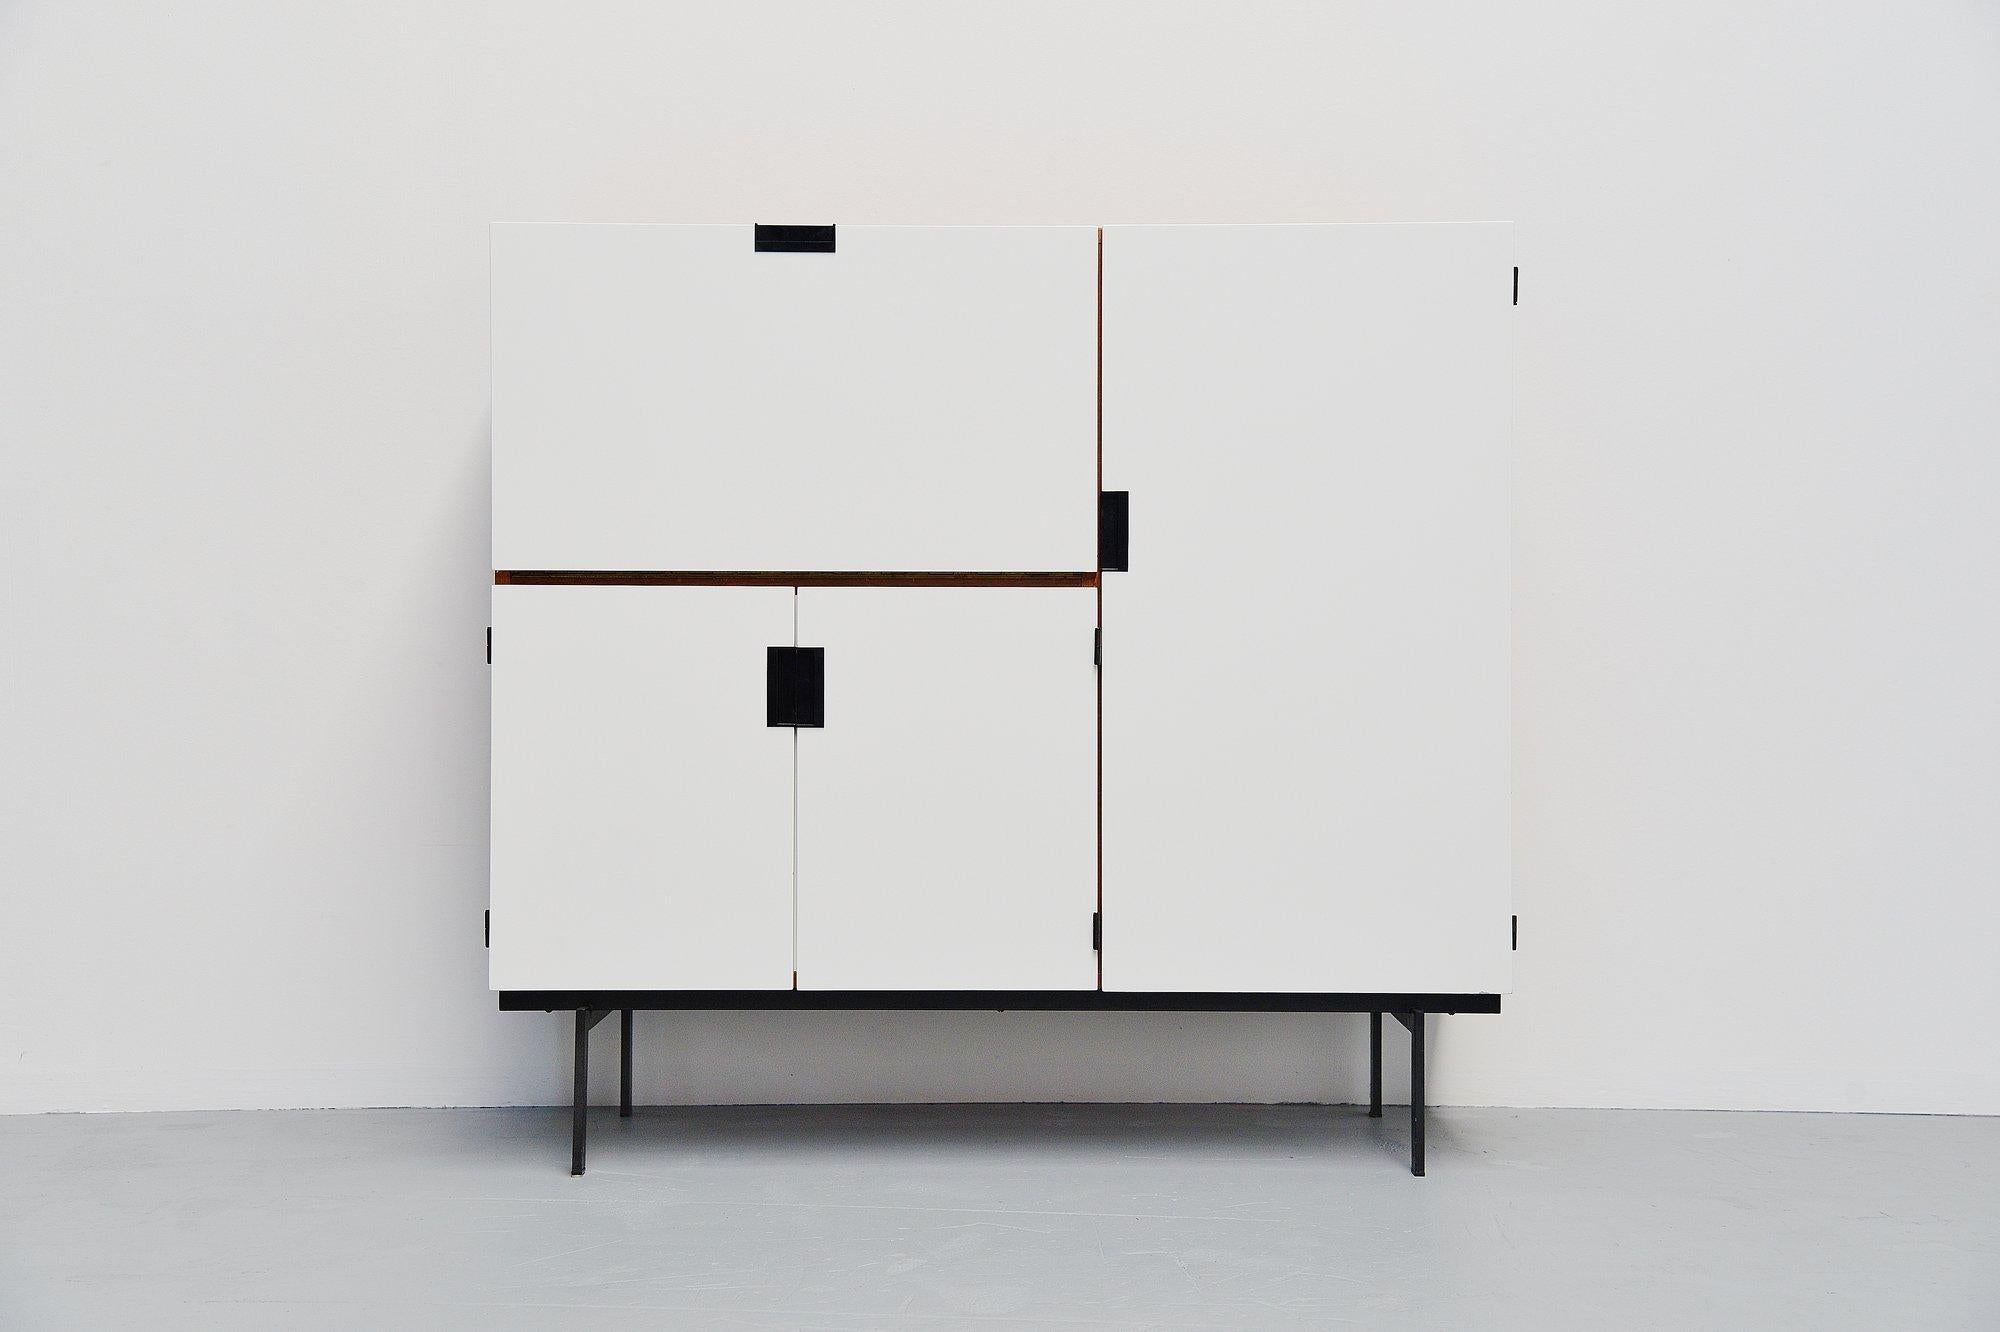 Very nice modernist cabinet designed by Cees Braakman and manufactured by Pastoe UMS, Holland 1958. This minimalist cabinet from the so called Japanese series is made of teak wooden veneer and has a white painted front. The grips are made of black